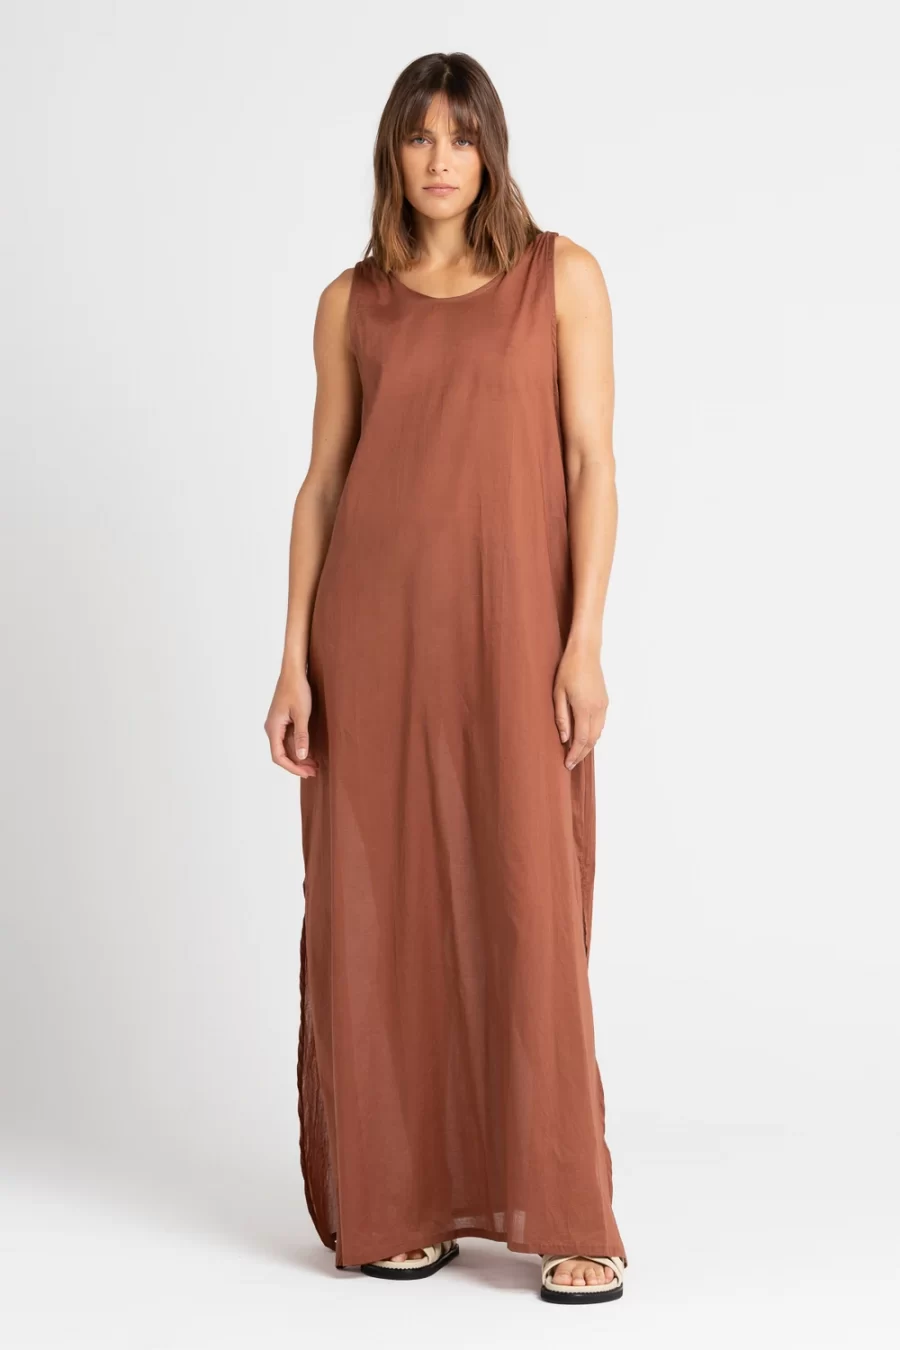 unikspace emily dress in Clay Without belt